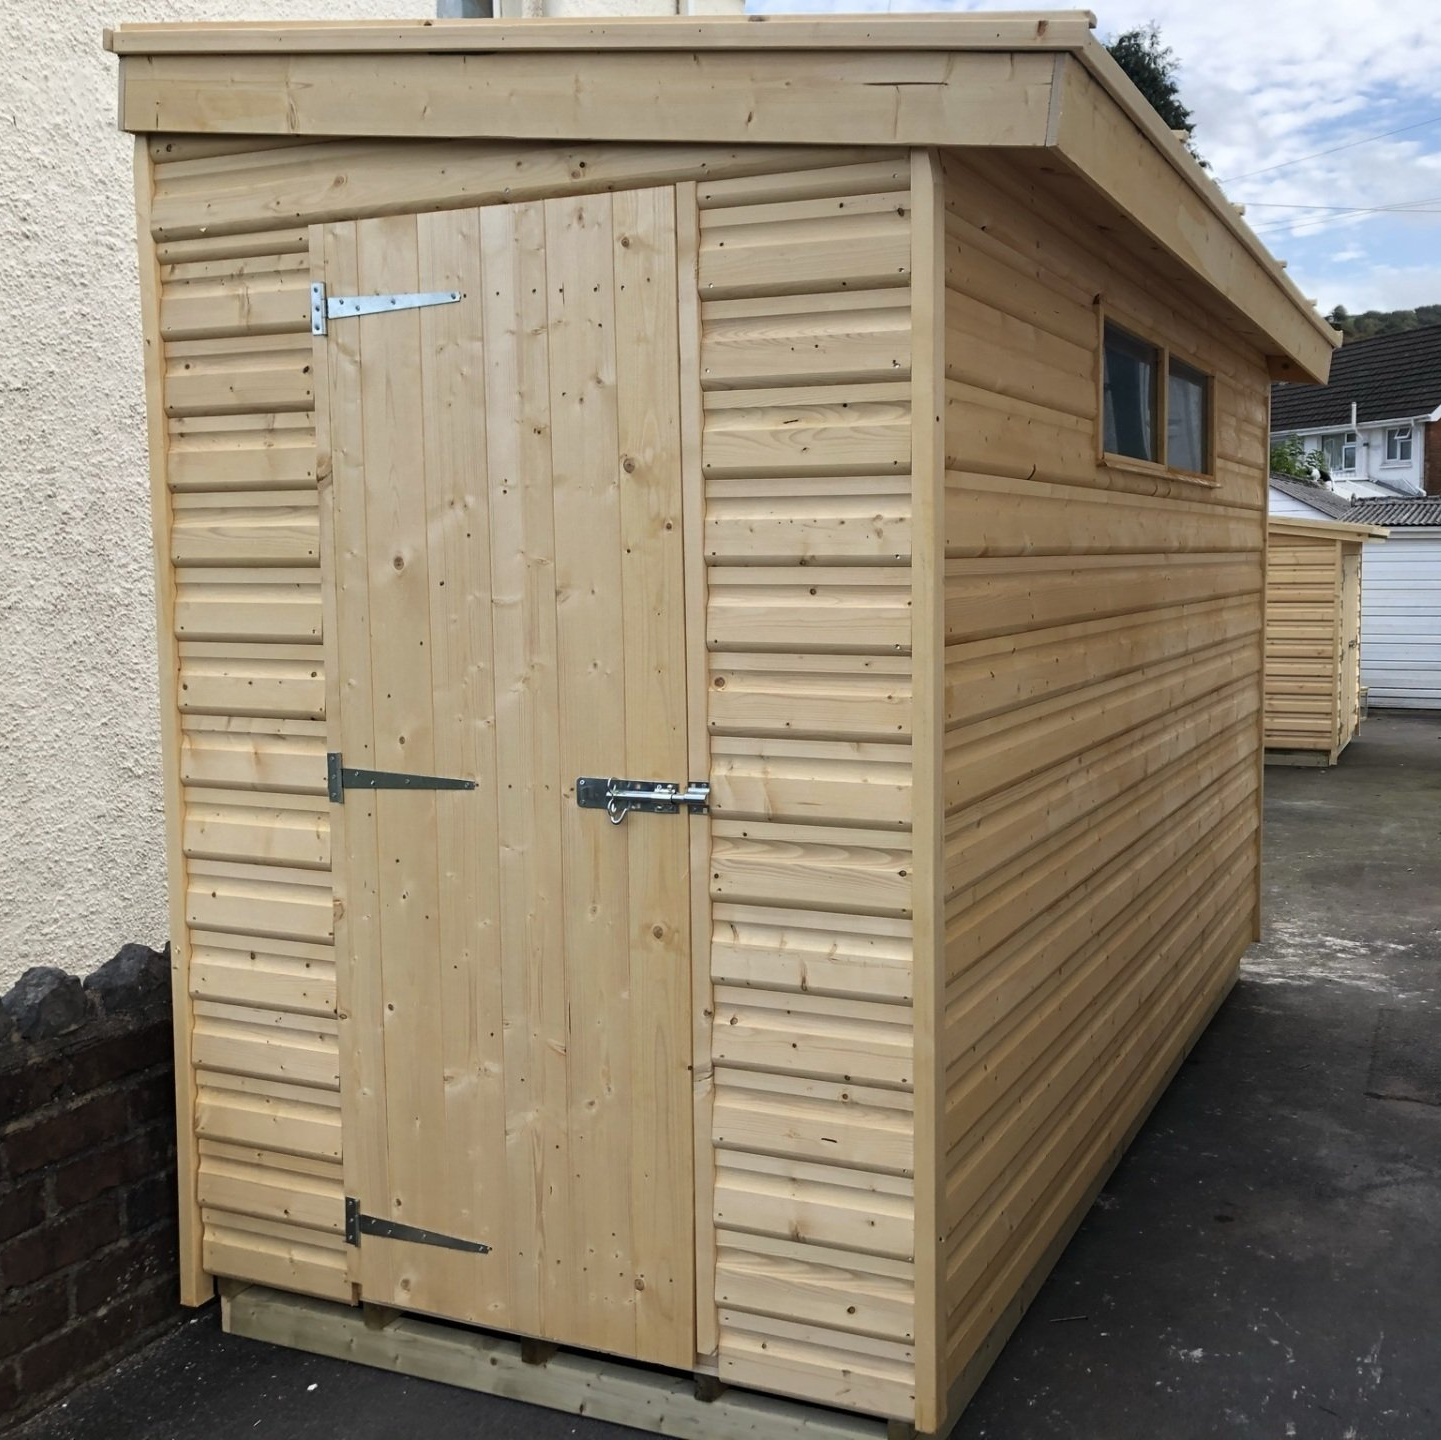 Pent shed with door on the short end and security windows on the right hand side which is suited if you don't need that much light.